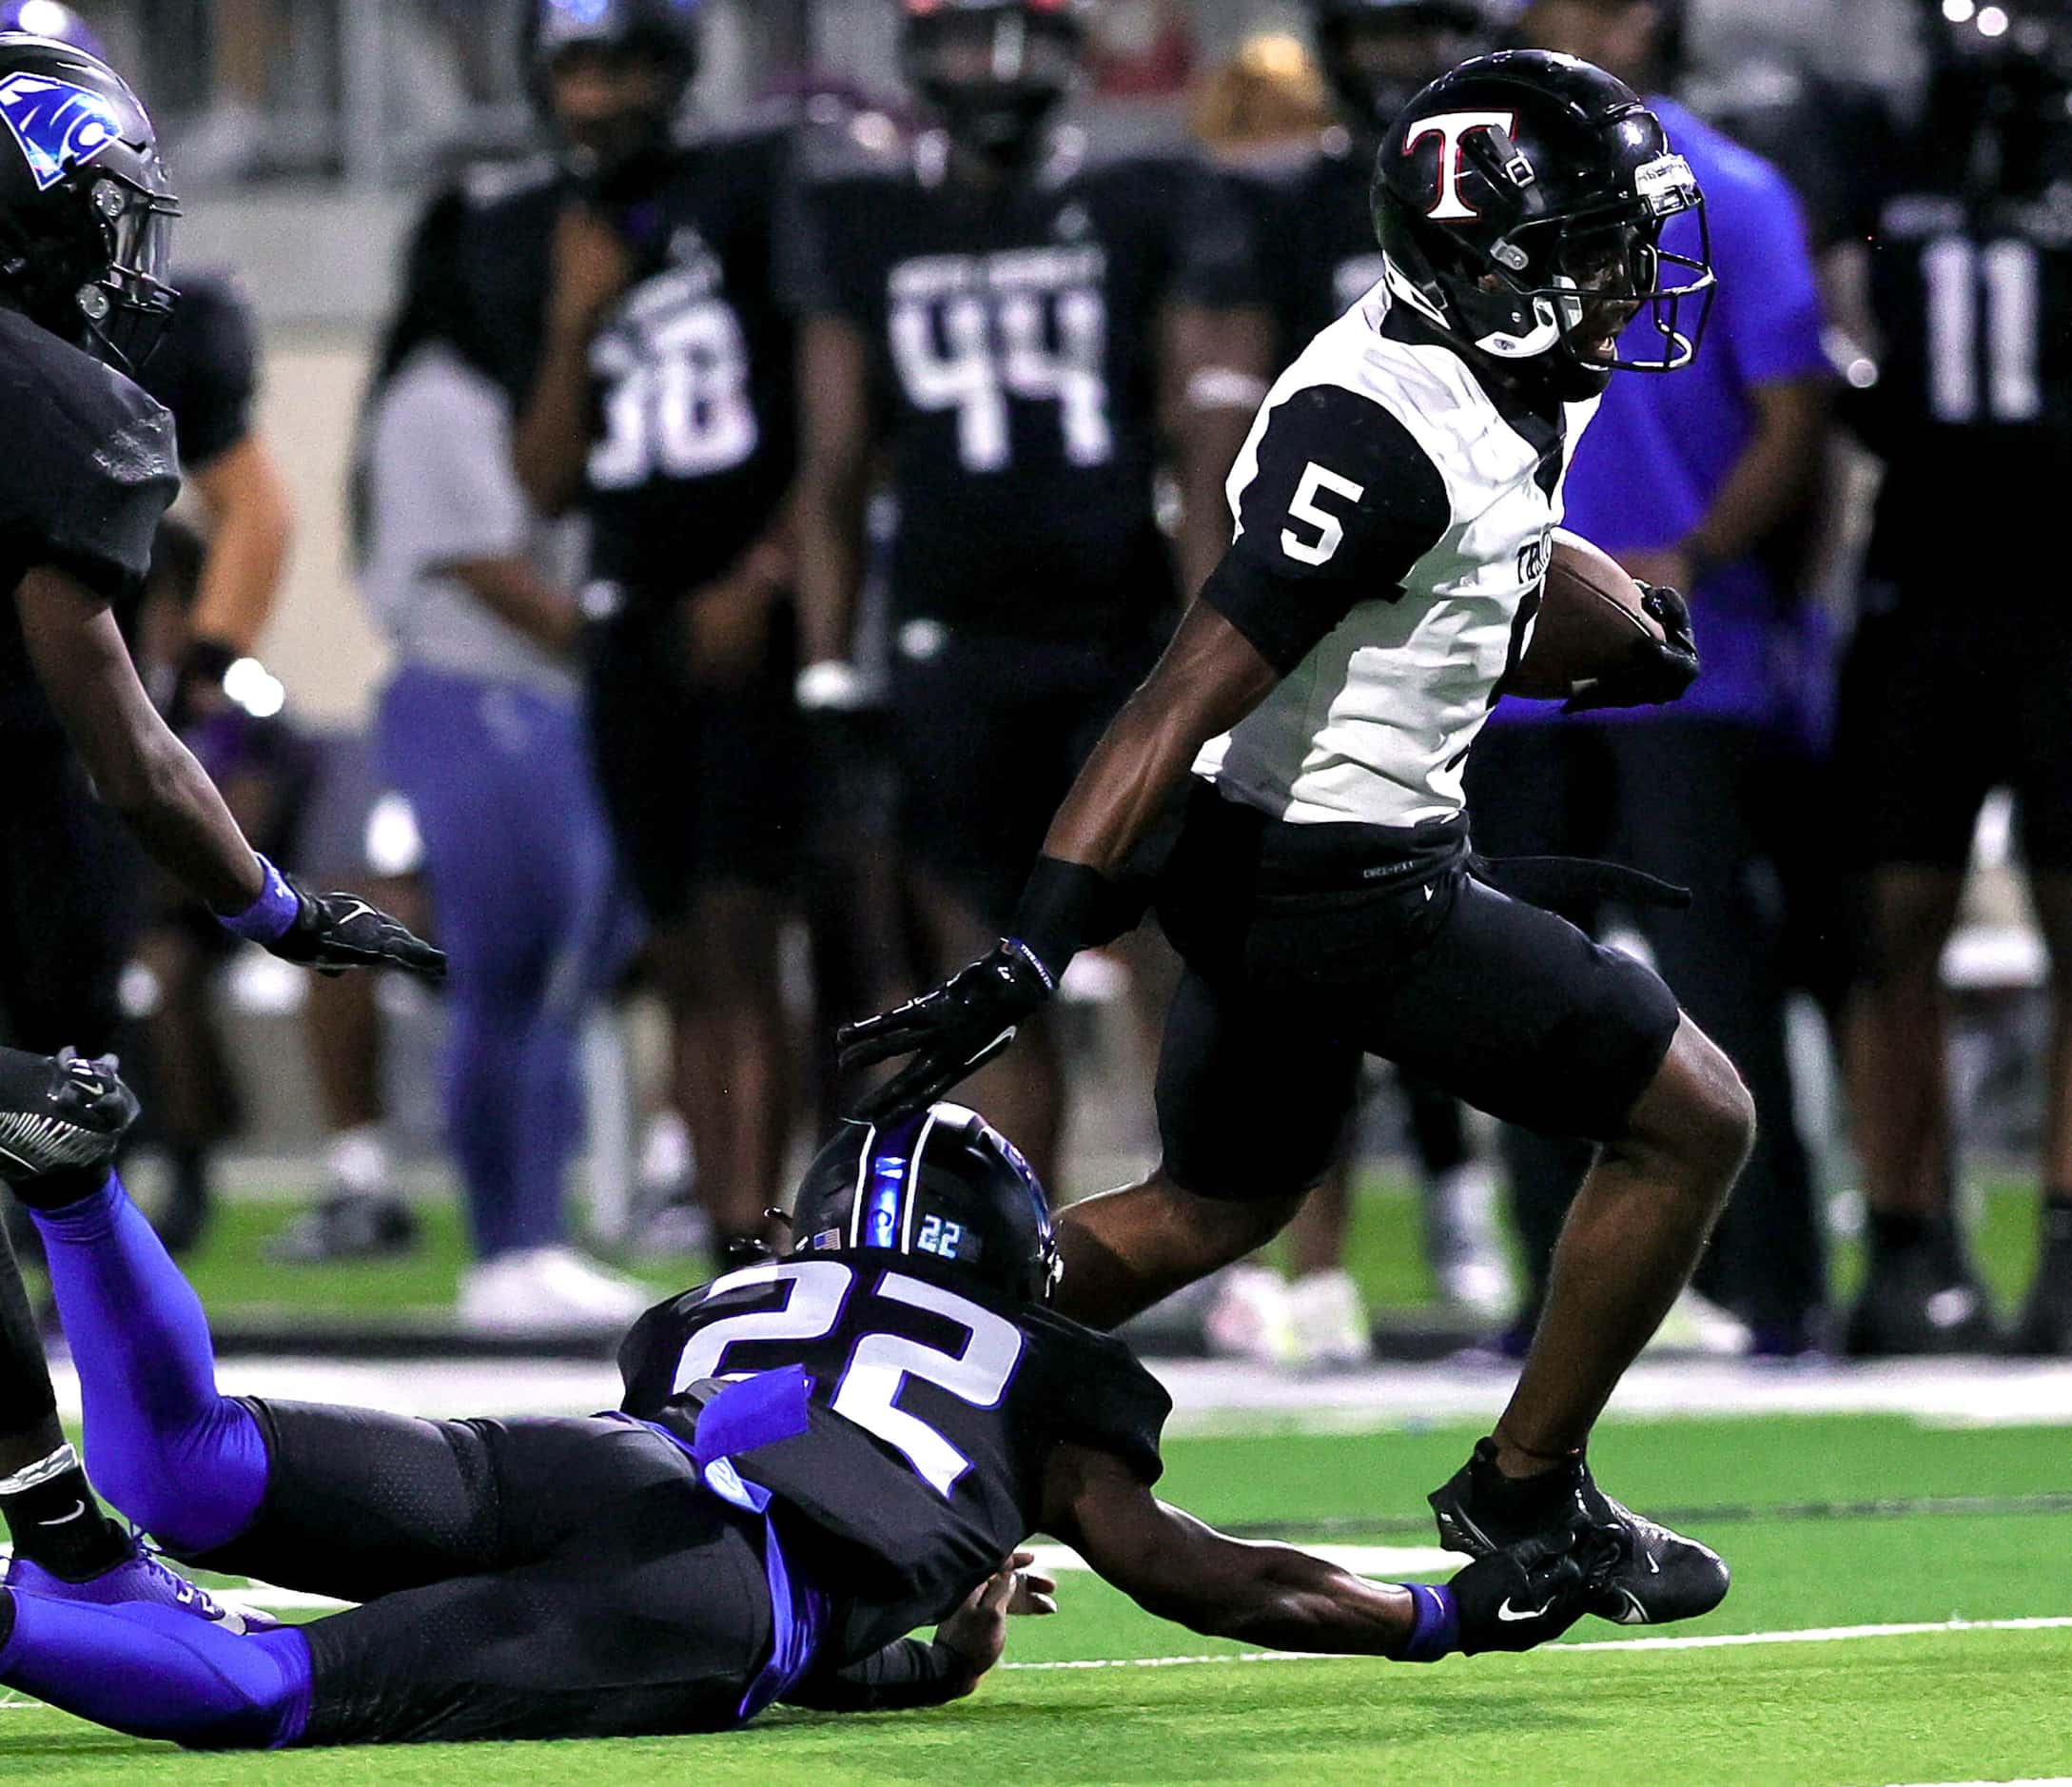 Euless Trinity running back Ethan Wright (5) avoids getting tackled by North Crowley...